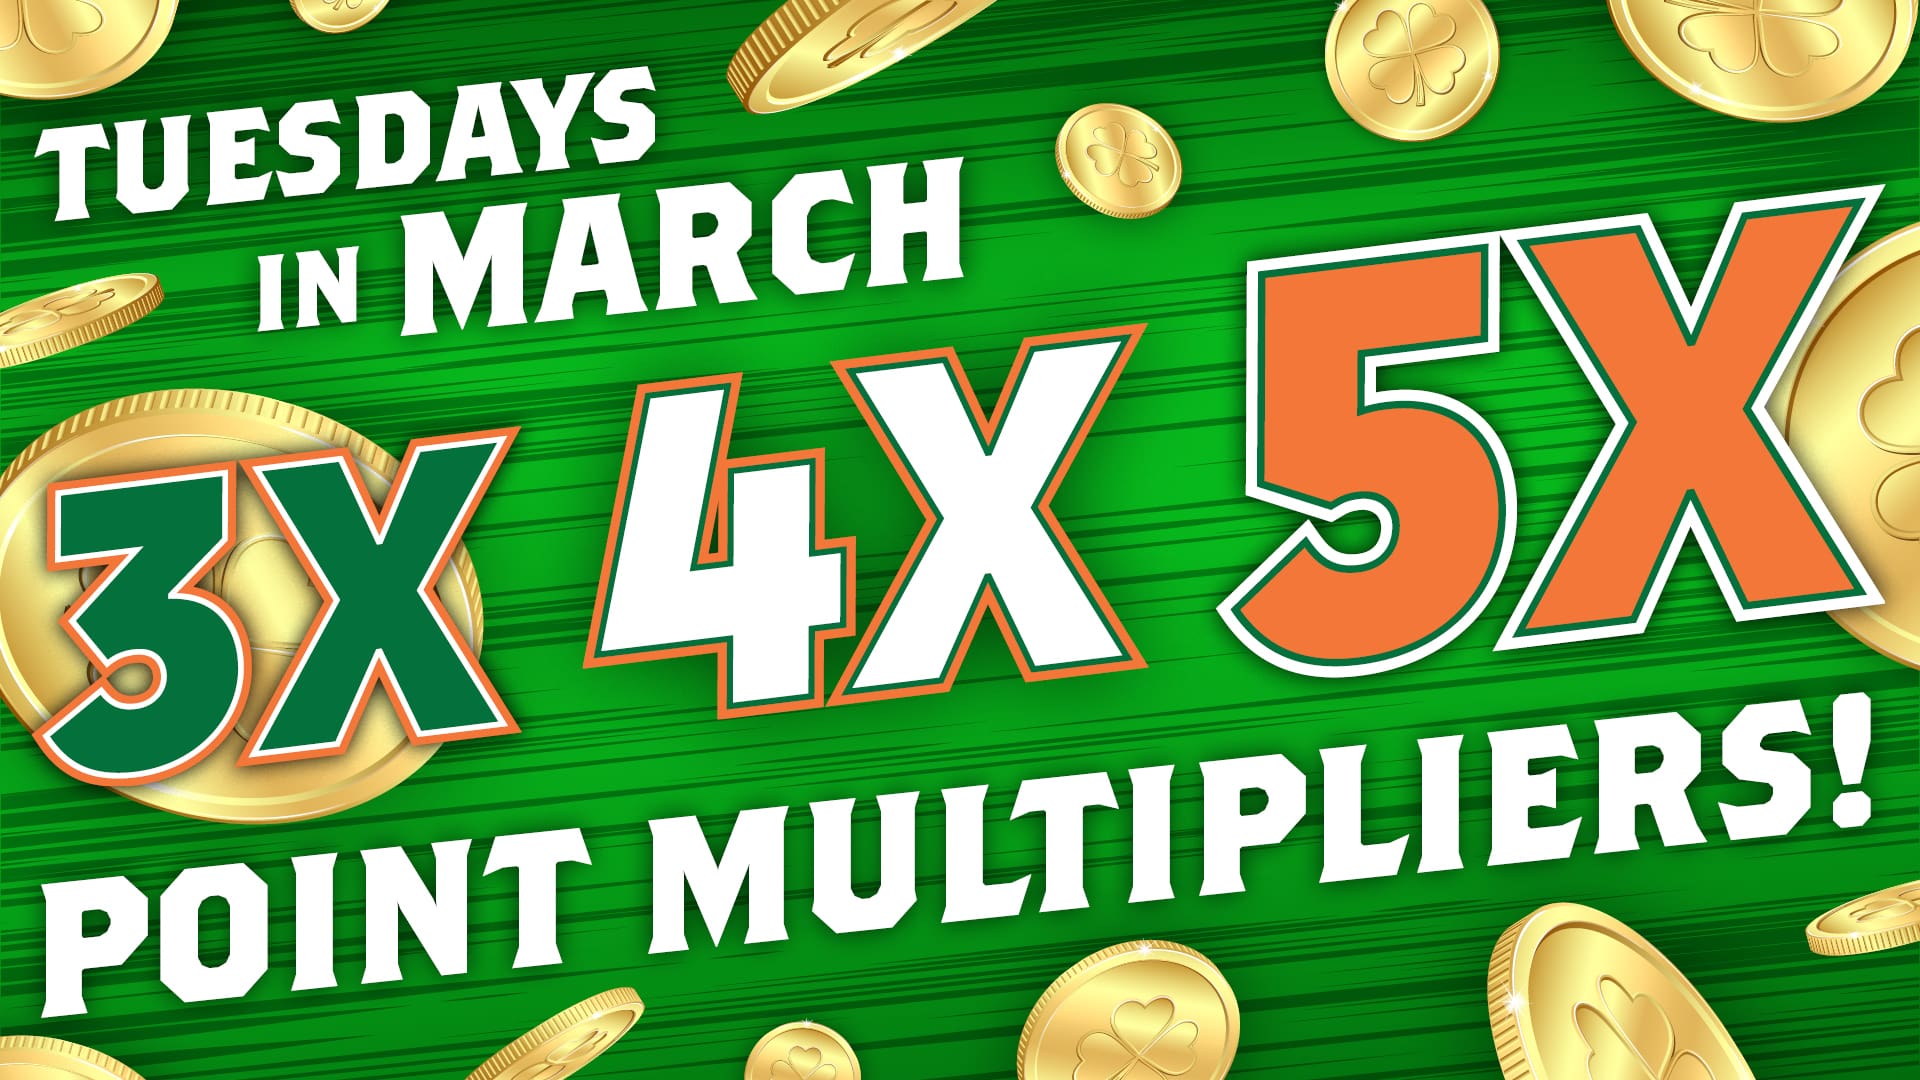 Tuesday 3x 4x 5x Point Multipliers